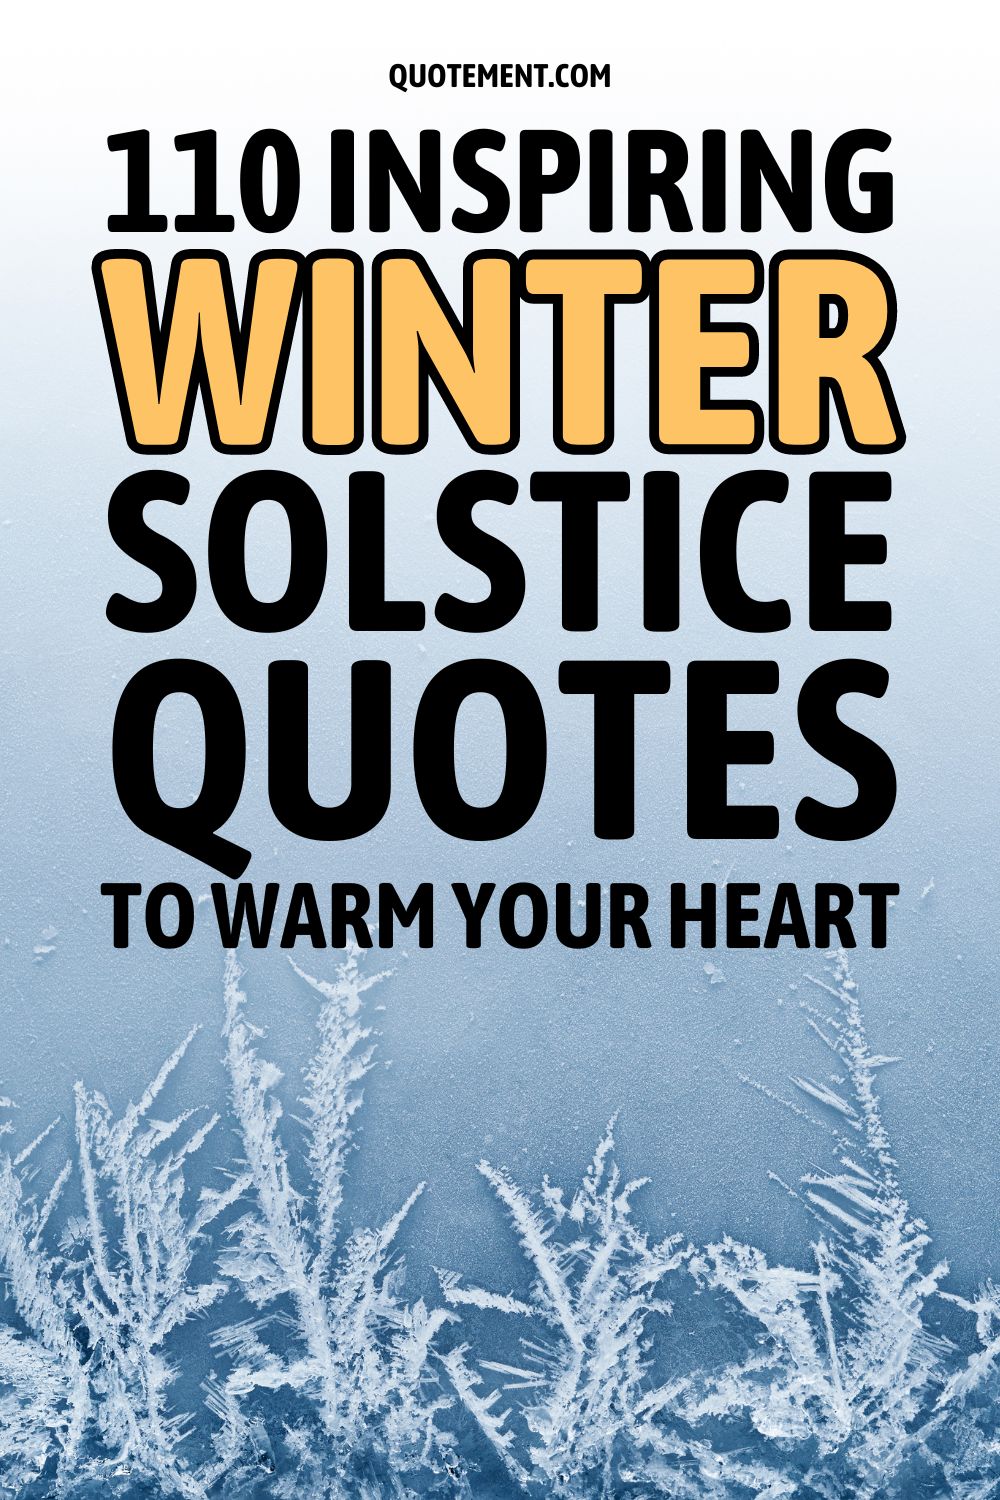 110 Inspiring Winter Solstice Quotes To Warm Your Heart 